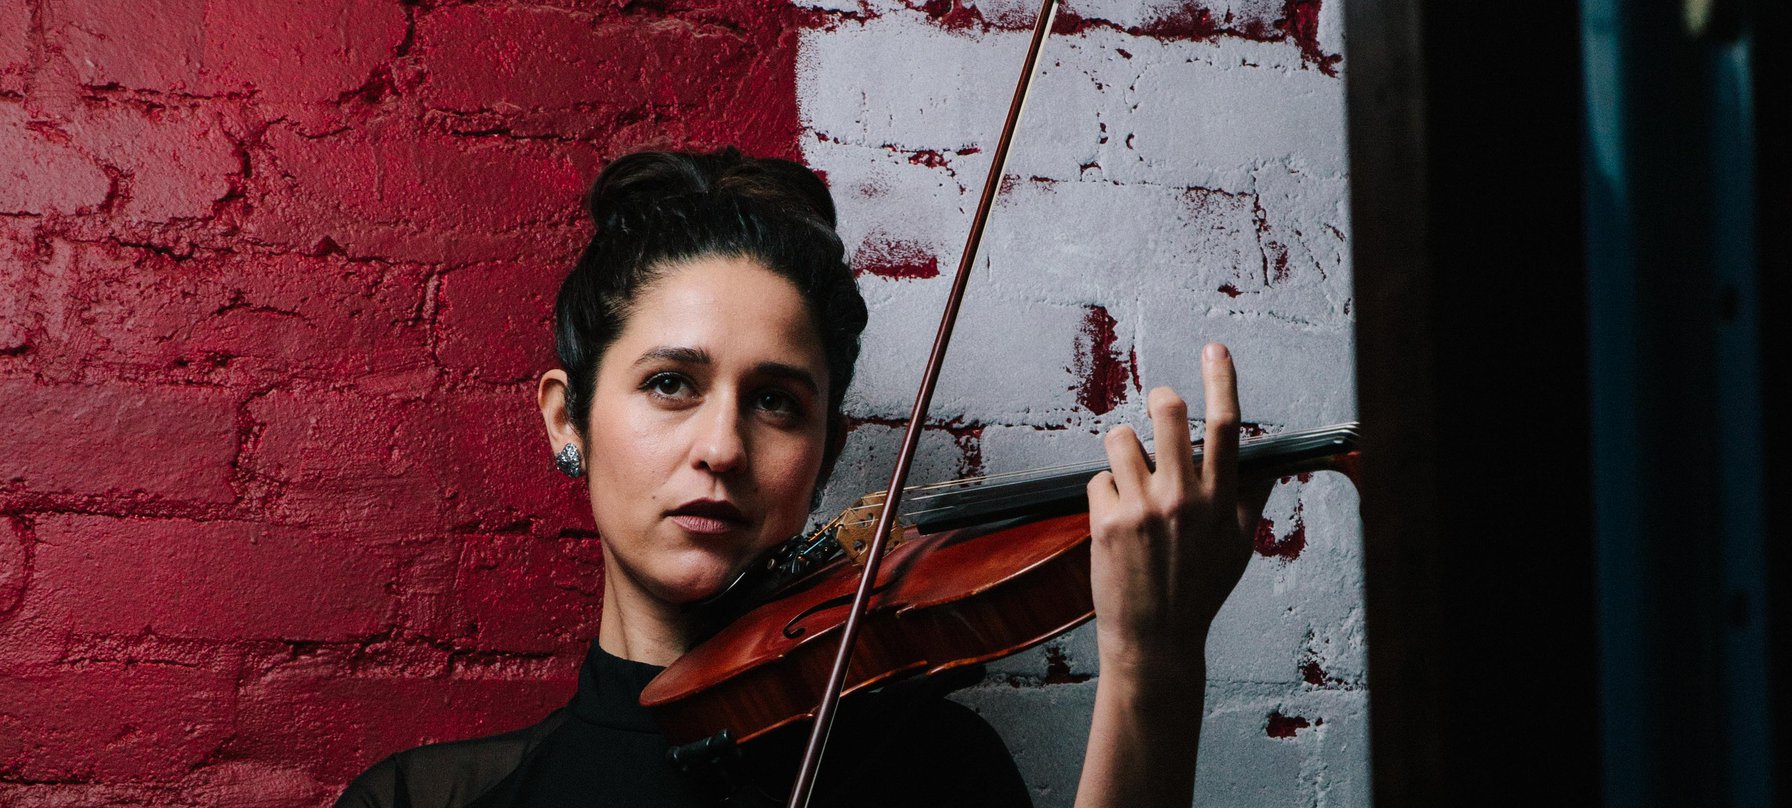 A photo of Natalya Bing playing her violin in front of a red and white painted brick wall. Credit Tom Wilkinson.